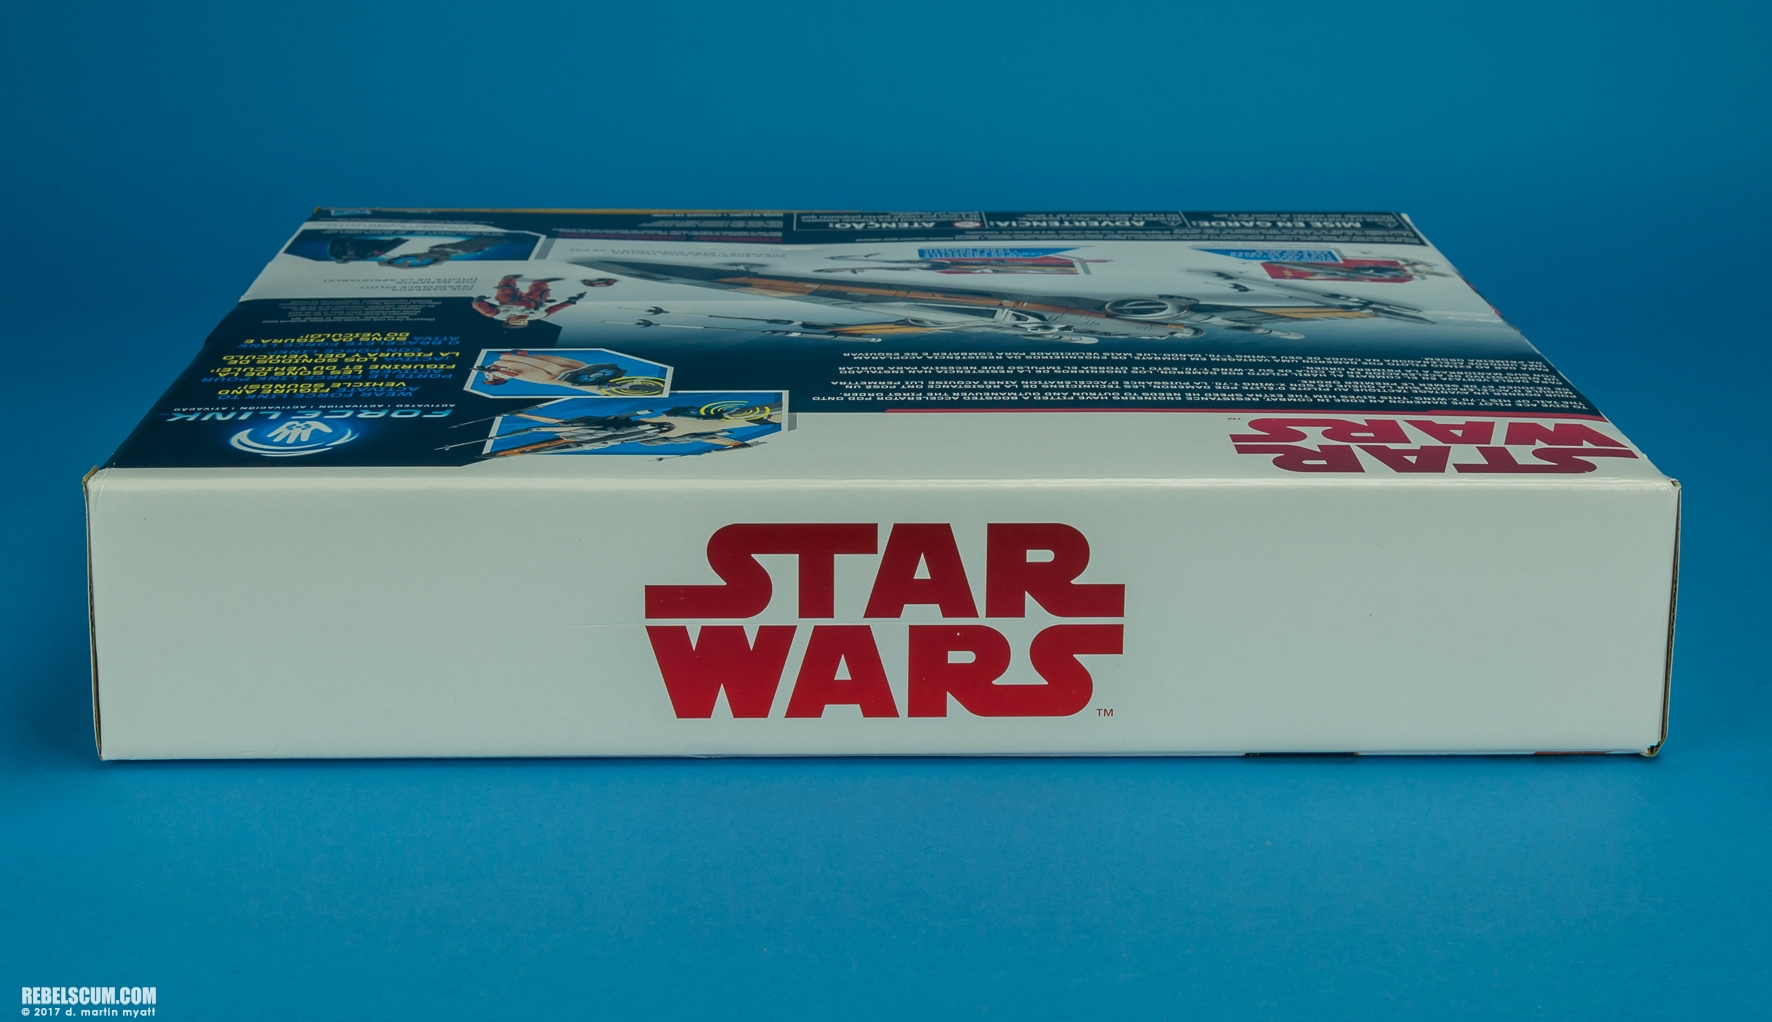 Poes-Boosted-X-Wing-Fighter-The-Last-Jedi-Hasbro-026.jpg